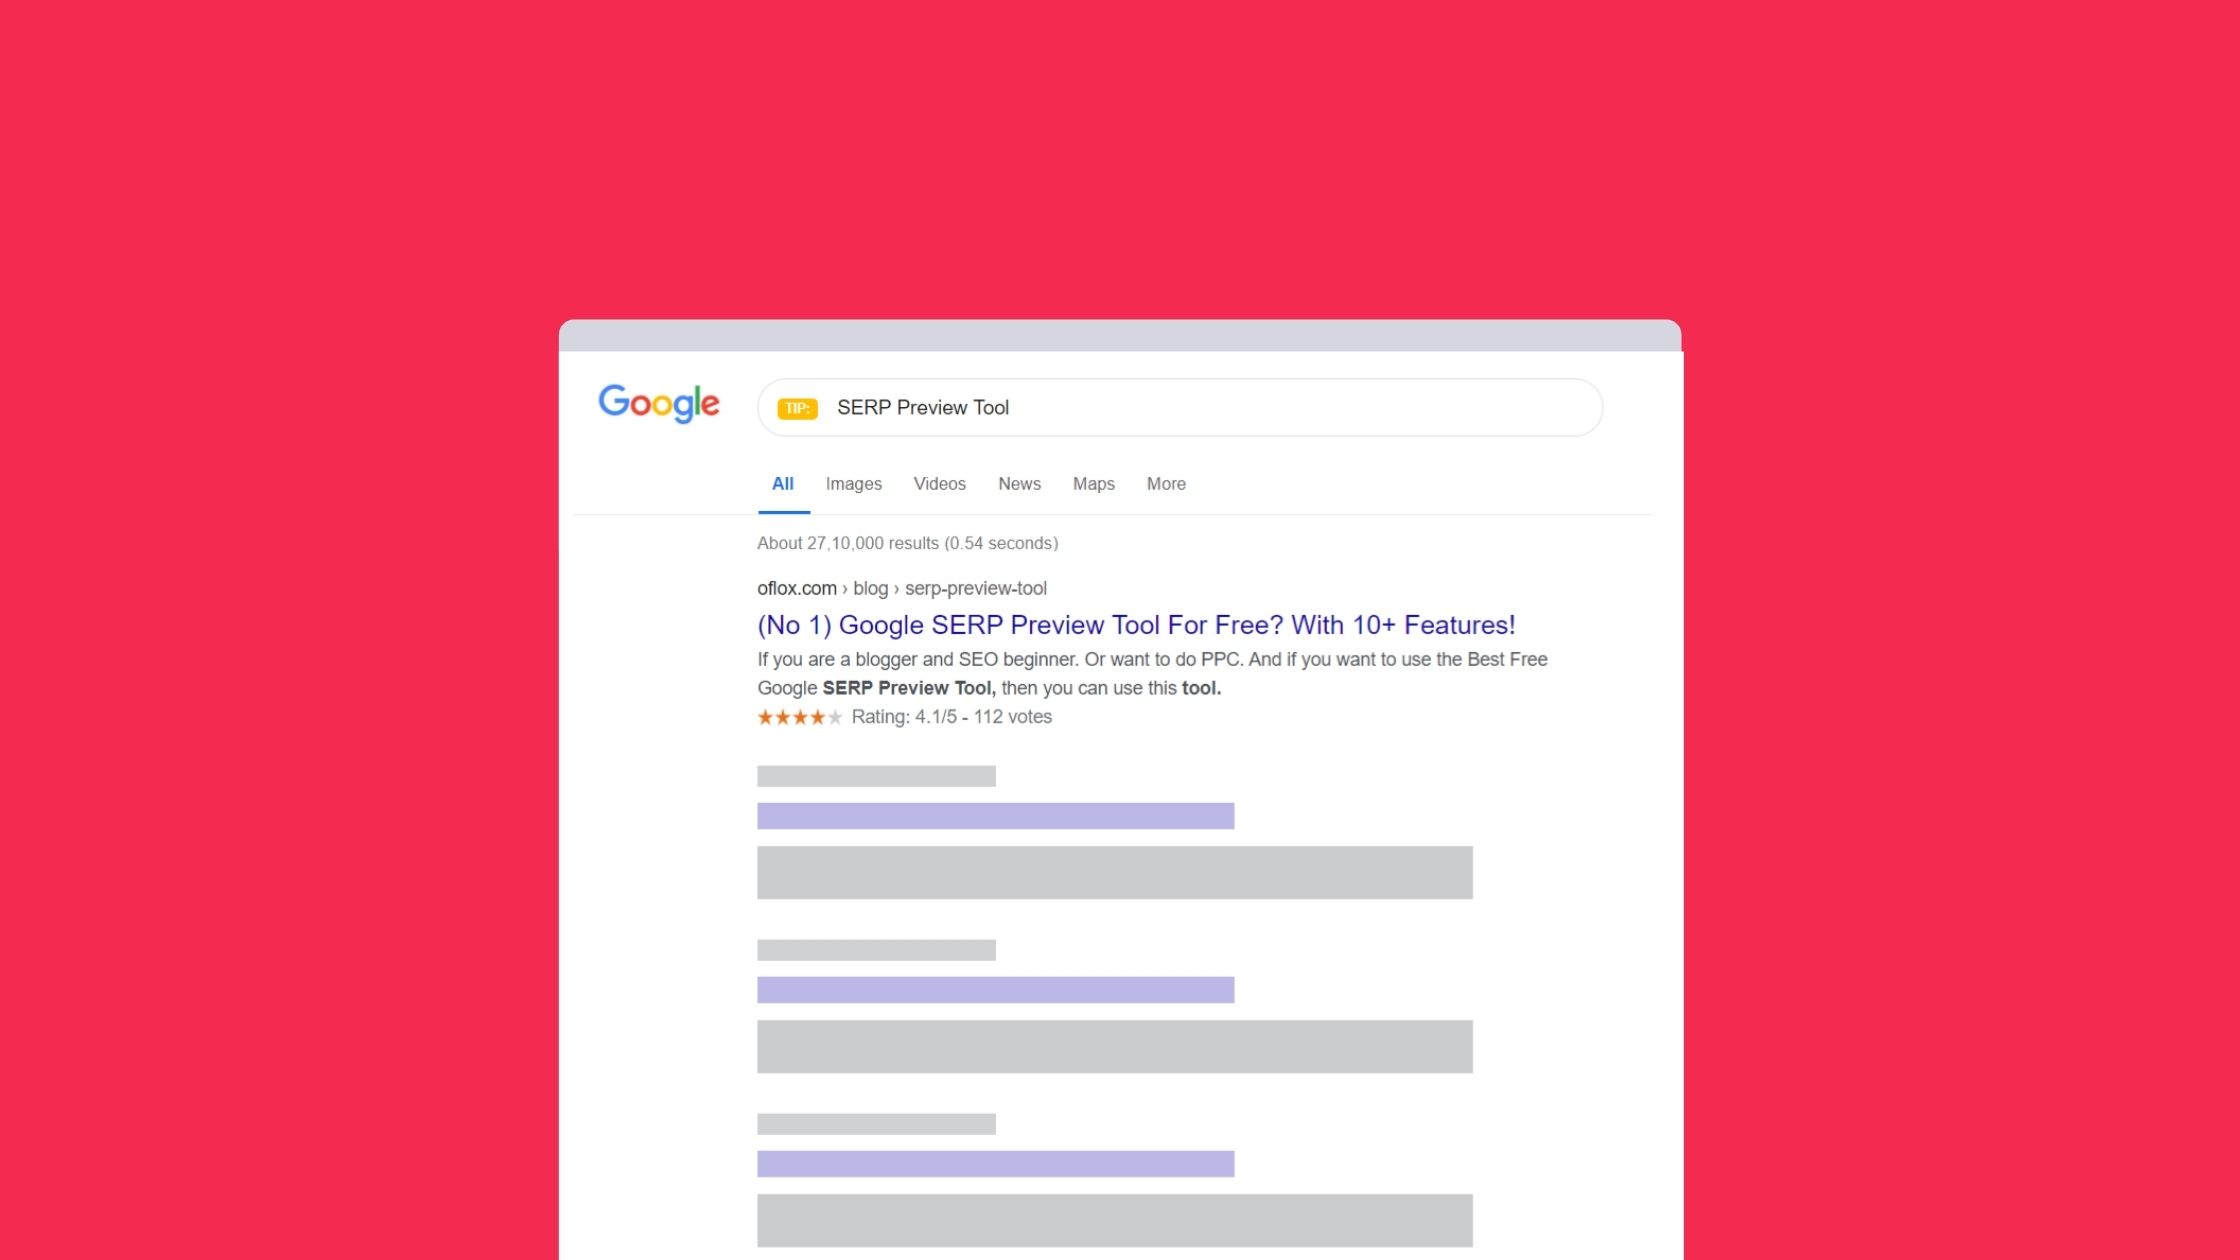 SERP Preview Tool